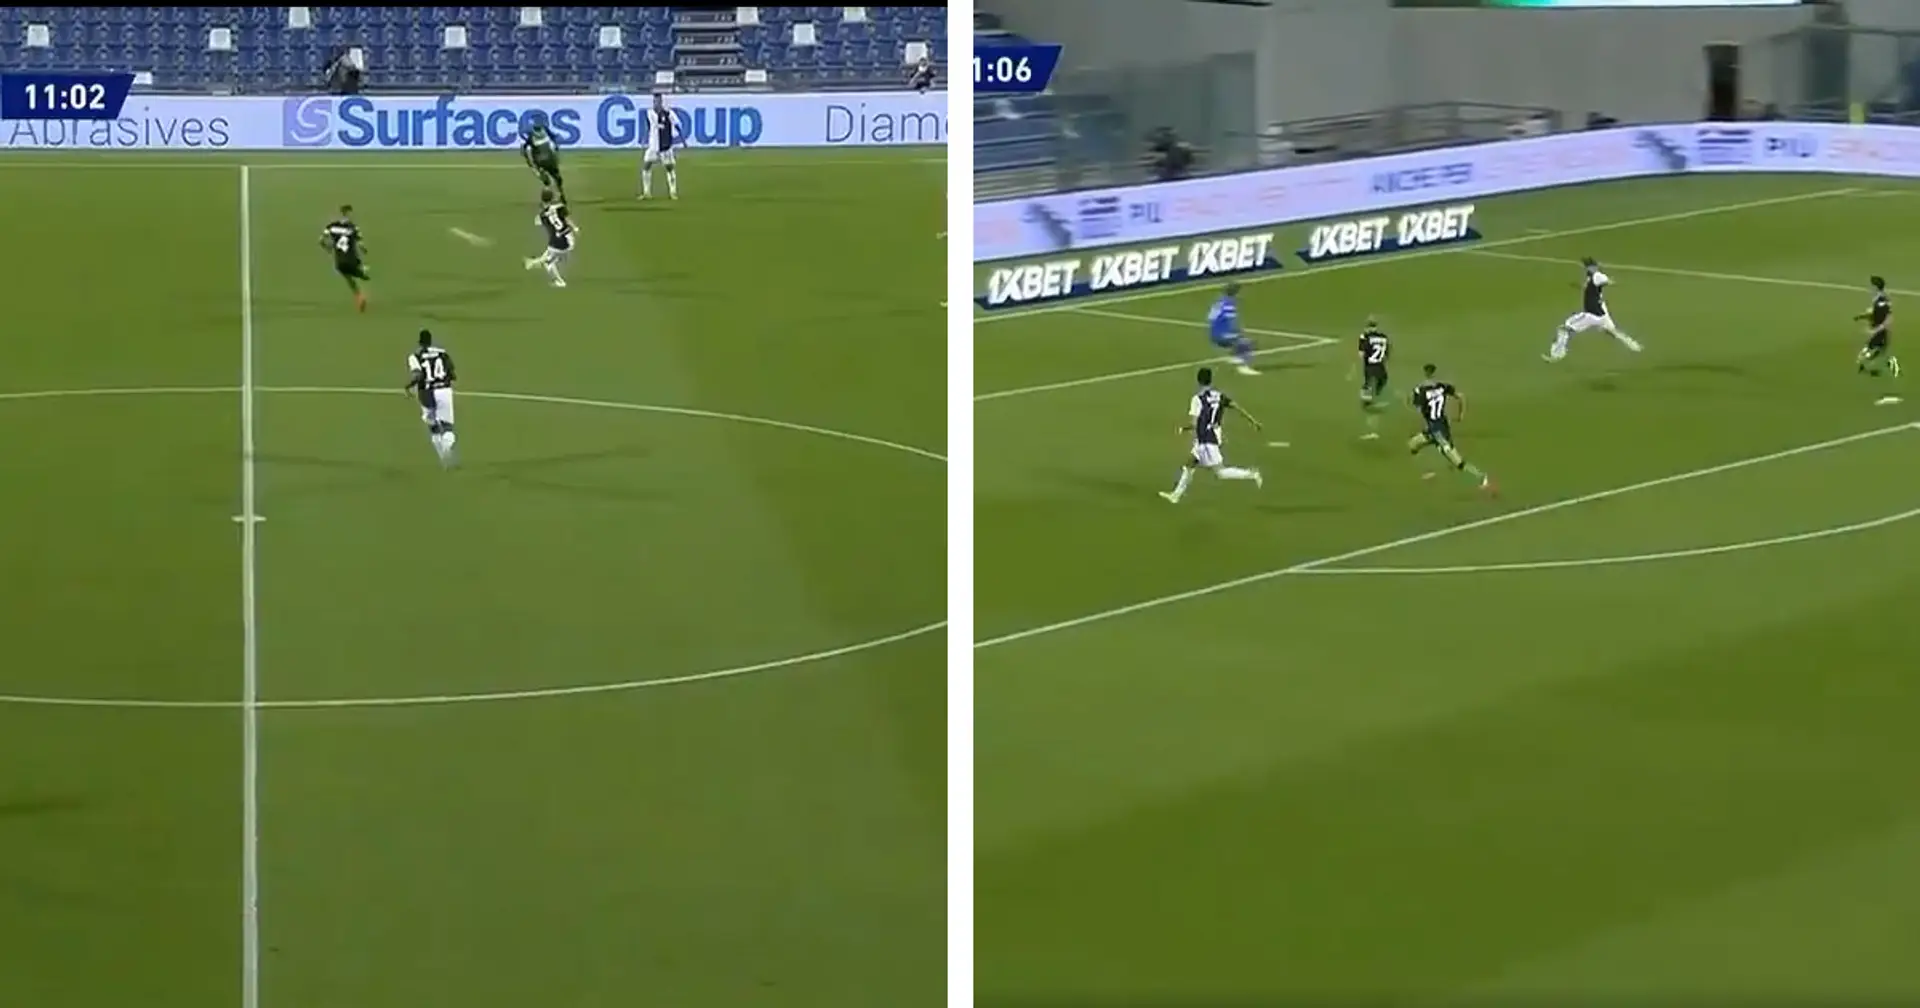 Mind blown: Insane one-touch long ball assist from Barca's future midfielder Pjanic